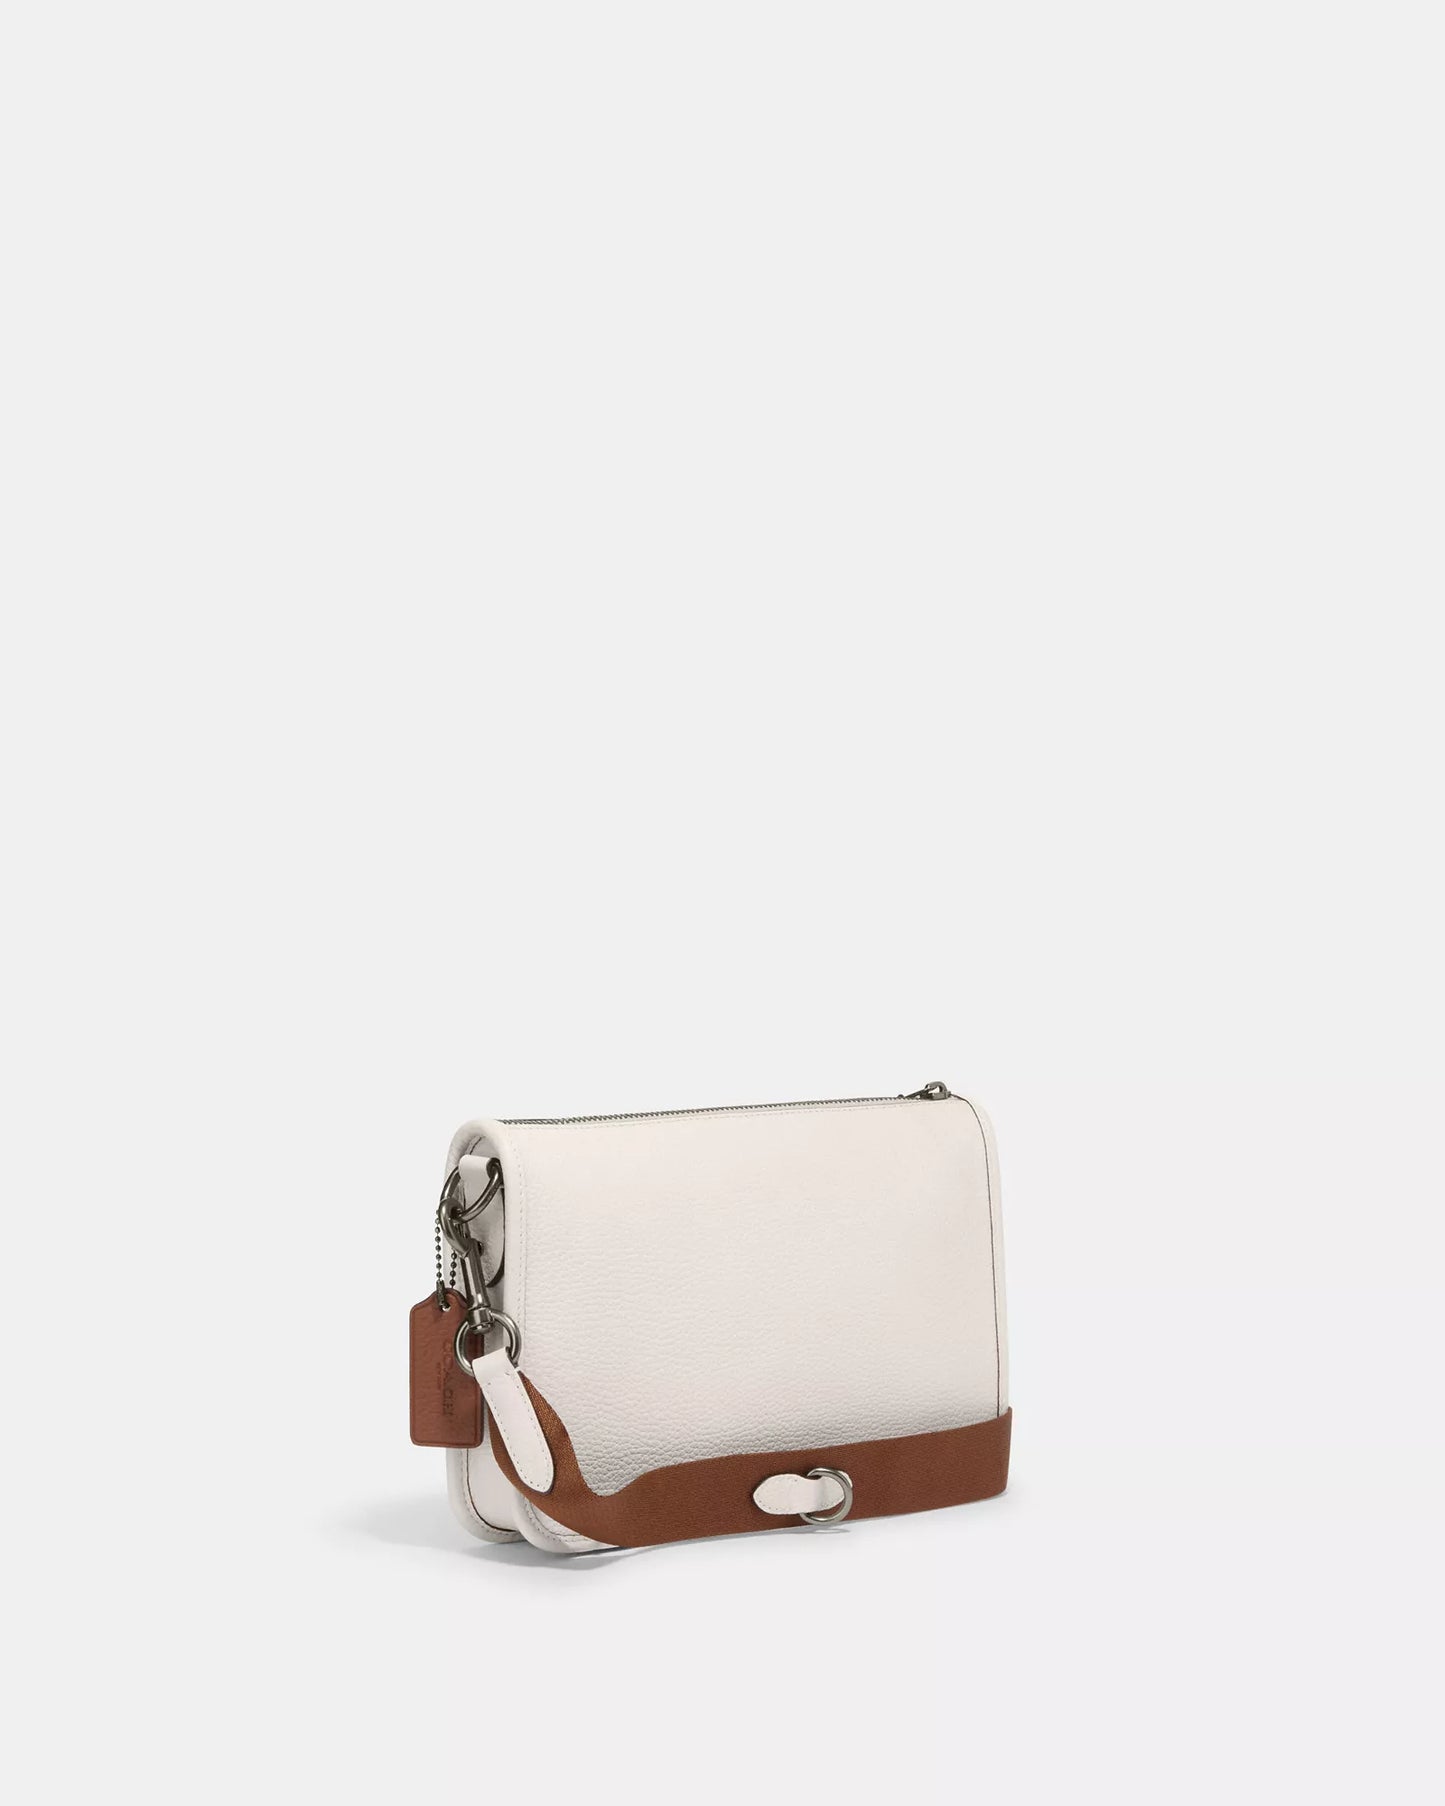 Coach Heritage Convertible Crossbody With Coach Stripe